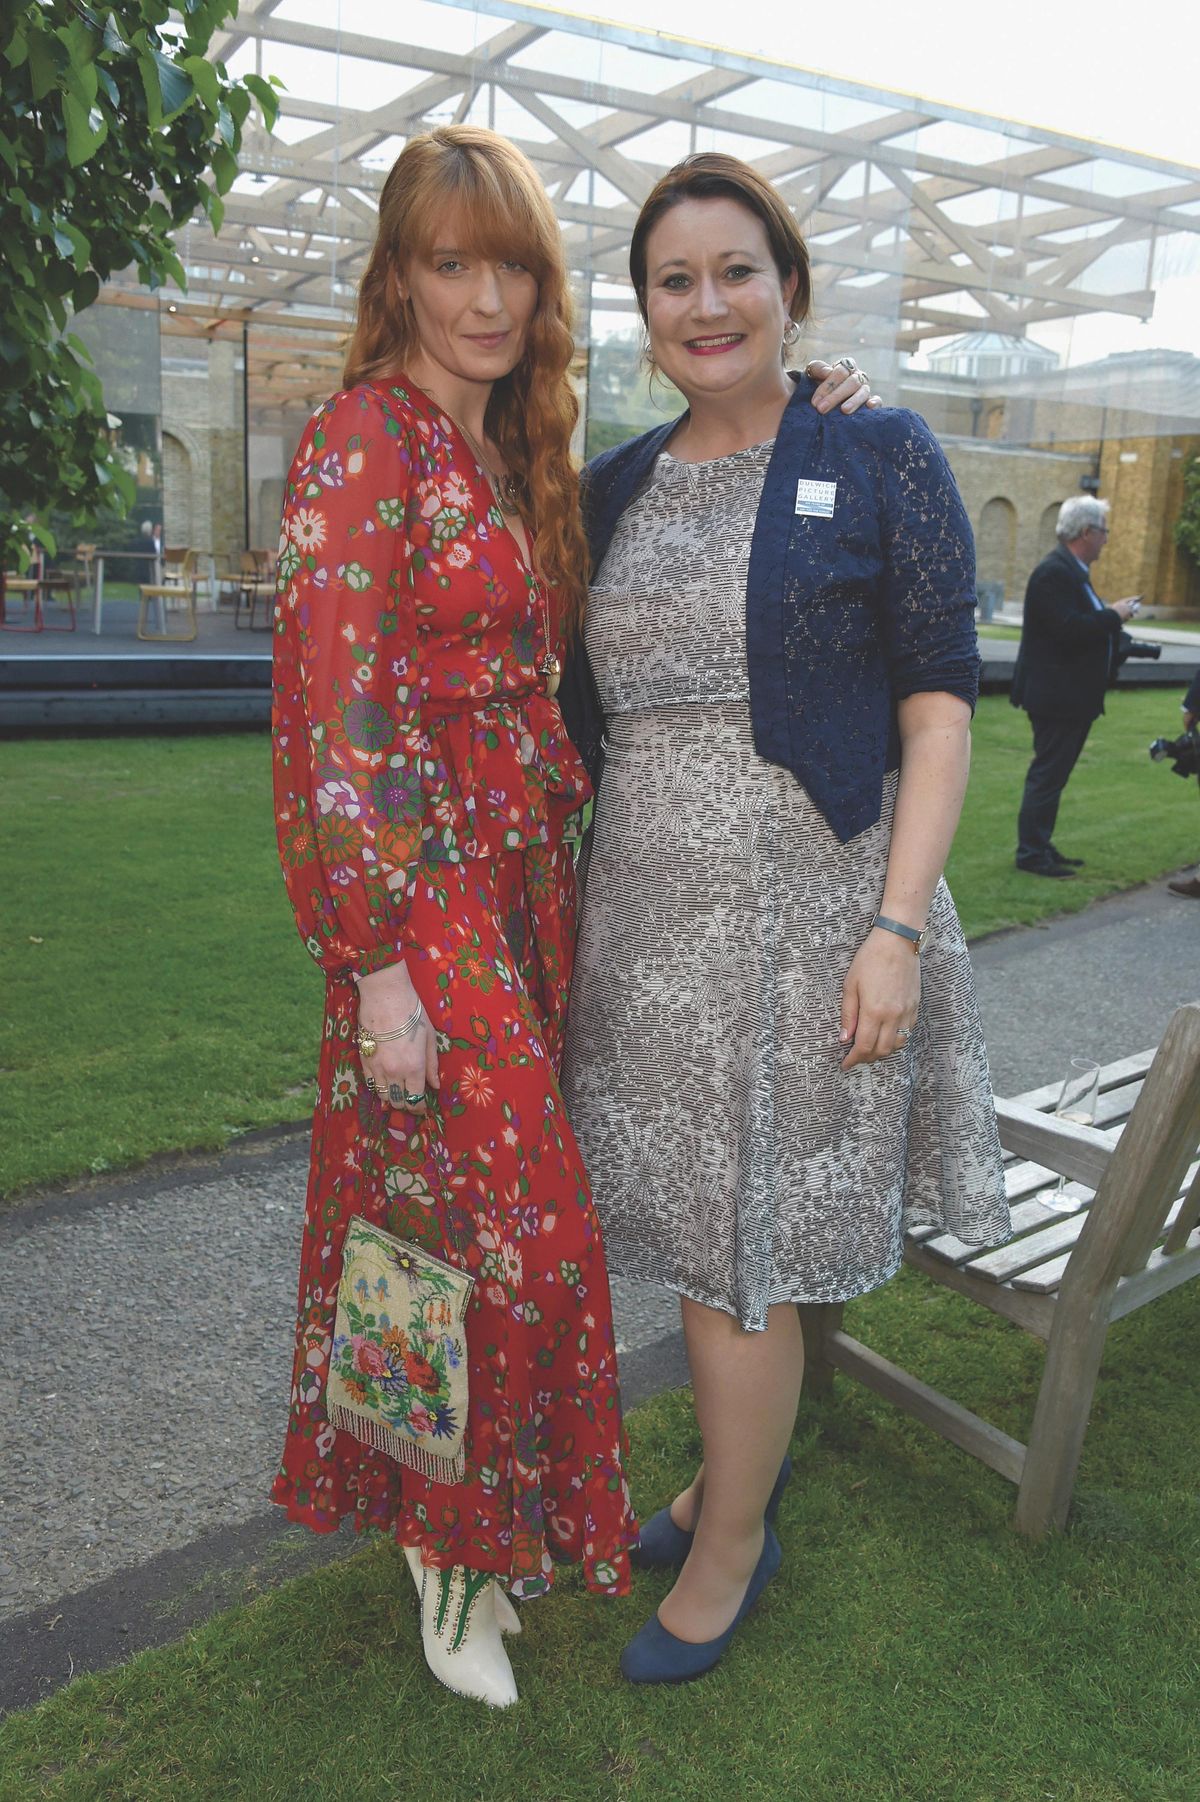 Florence Welch of Florence + The Machine (L) and Jennifer Scott attend the 2017 Dulwich Picture Gallery Summer Party Photo by David M Benett/Dave Benett/Getty Images for Dulwich Picture Gallery